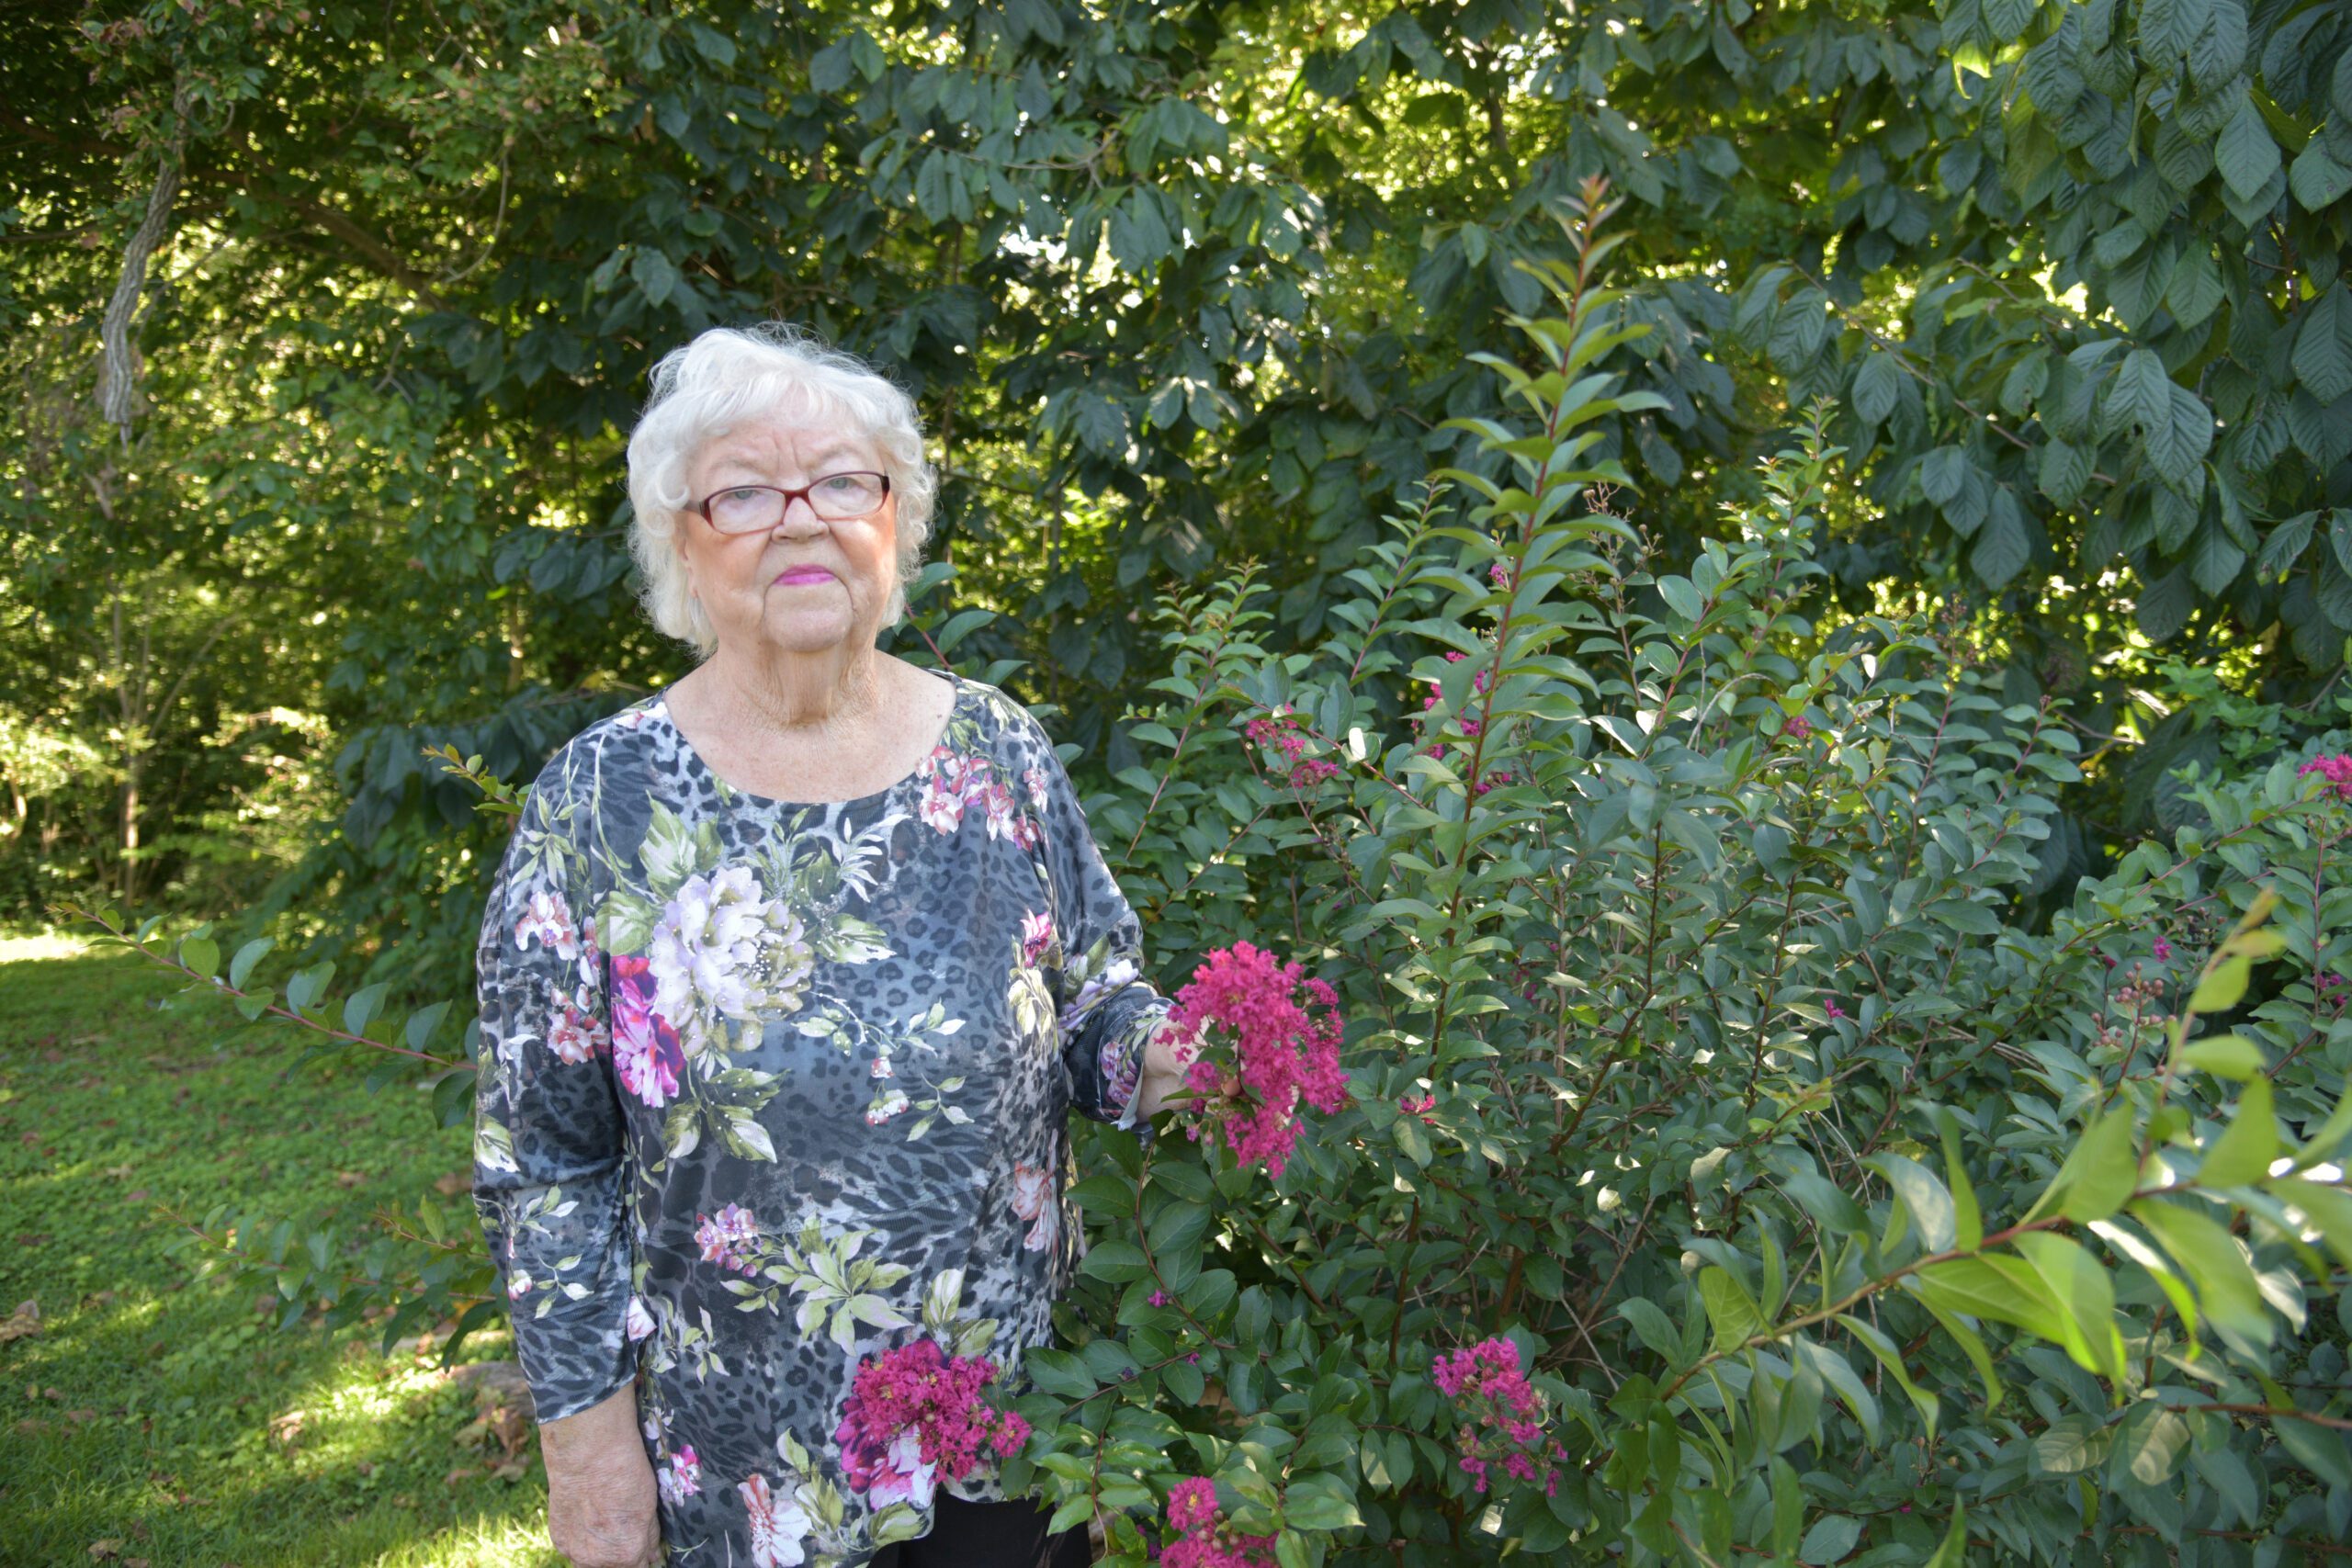 An elderly woman with white hair and glasses stands in a garden.